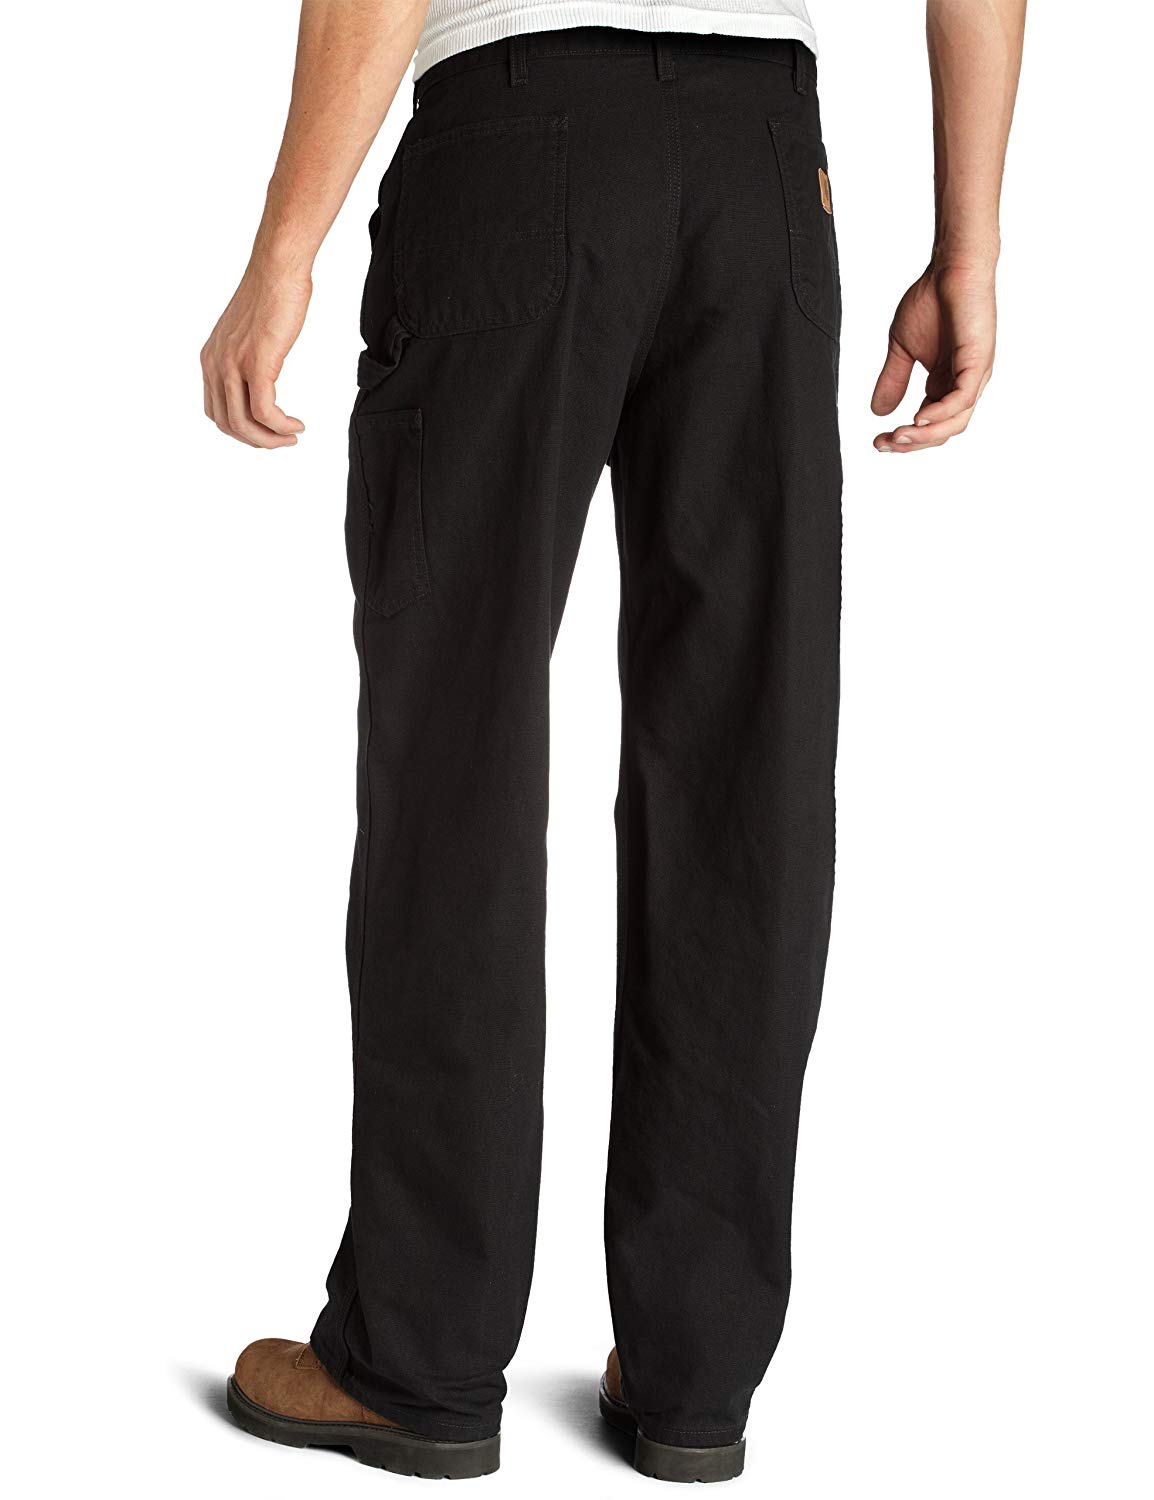 Carhartt Men's Washed Duck Flannel Lined Work Dungaree Pants